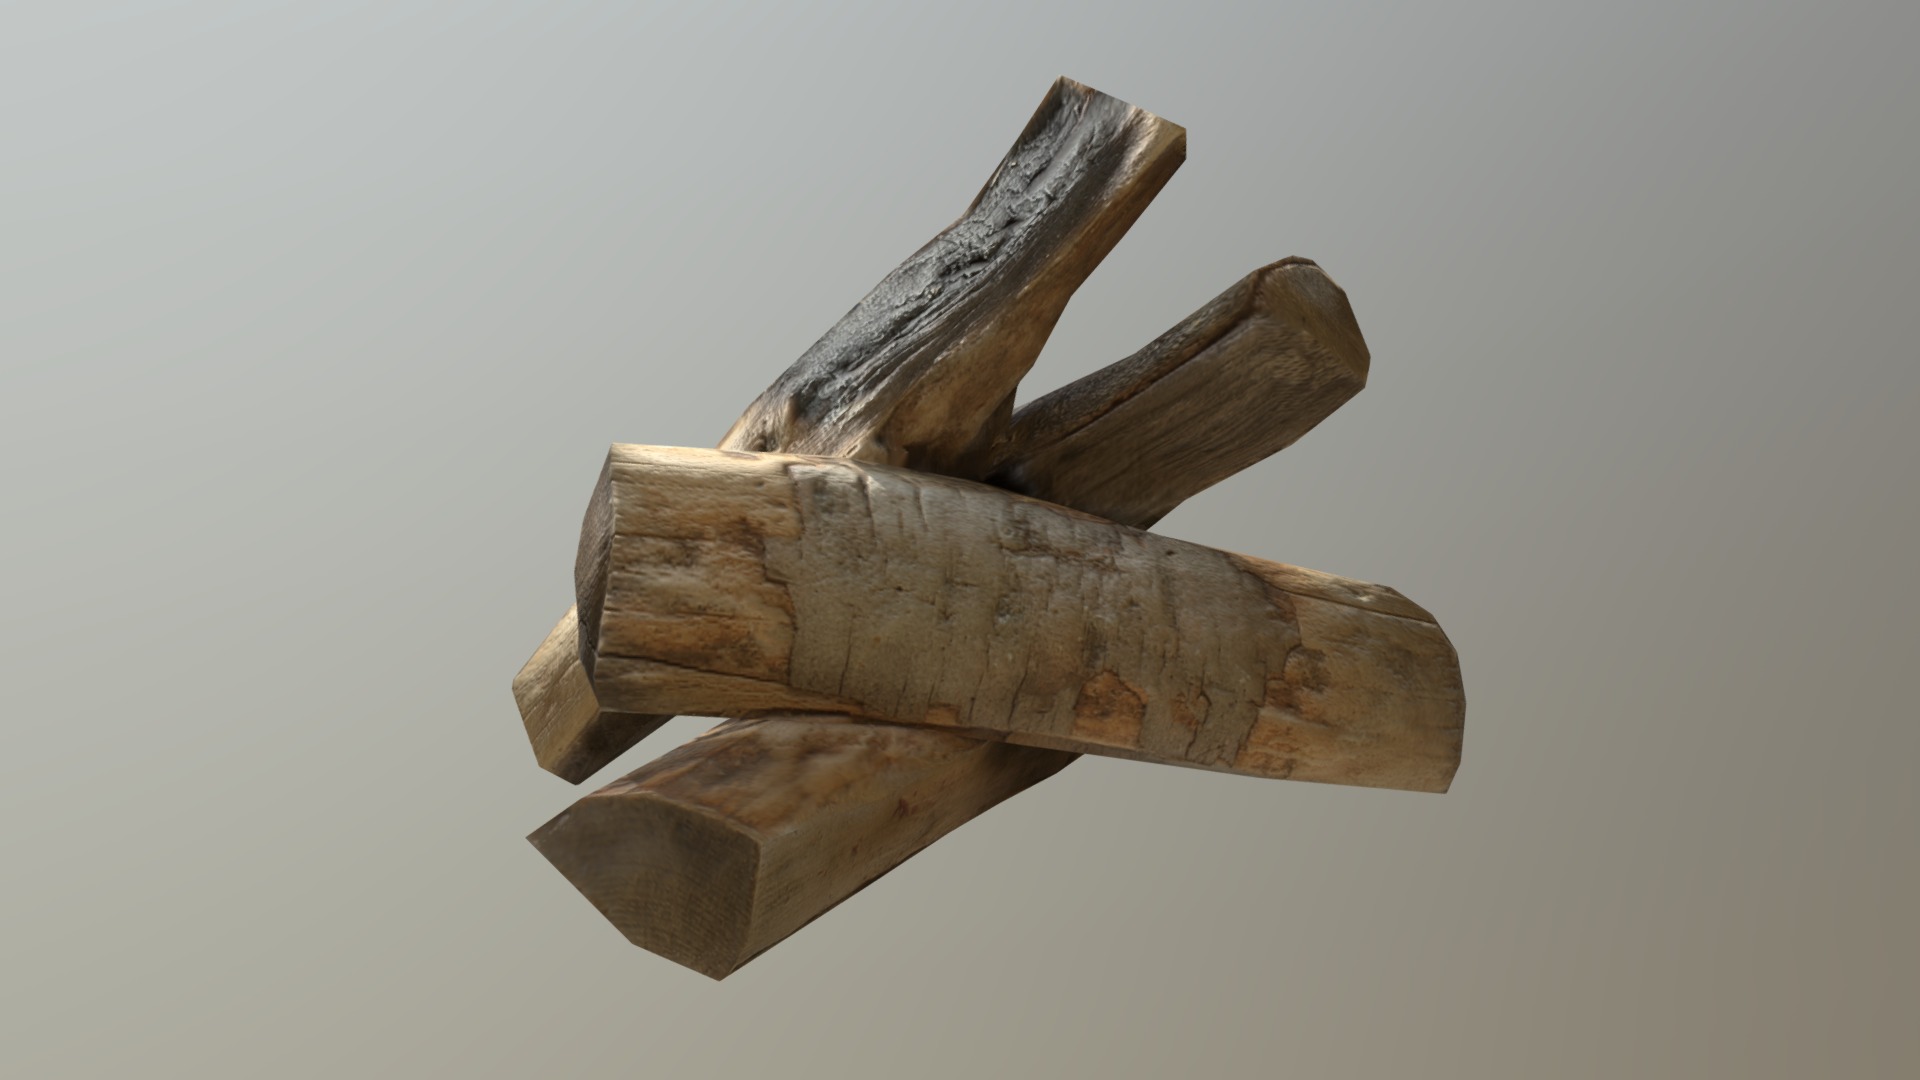 3D model wood billet - This is a 3D model of the wood billet. The 3D model is about a wooden axe with a handle.